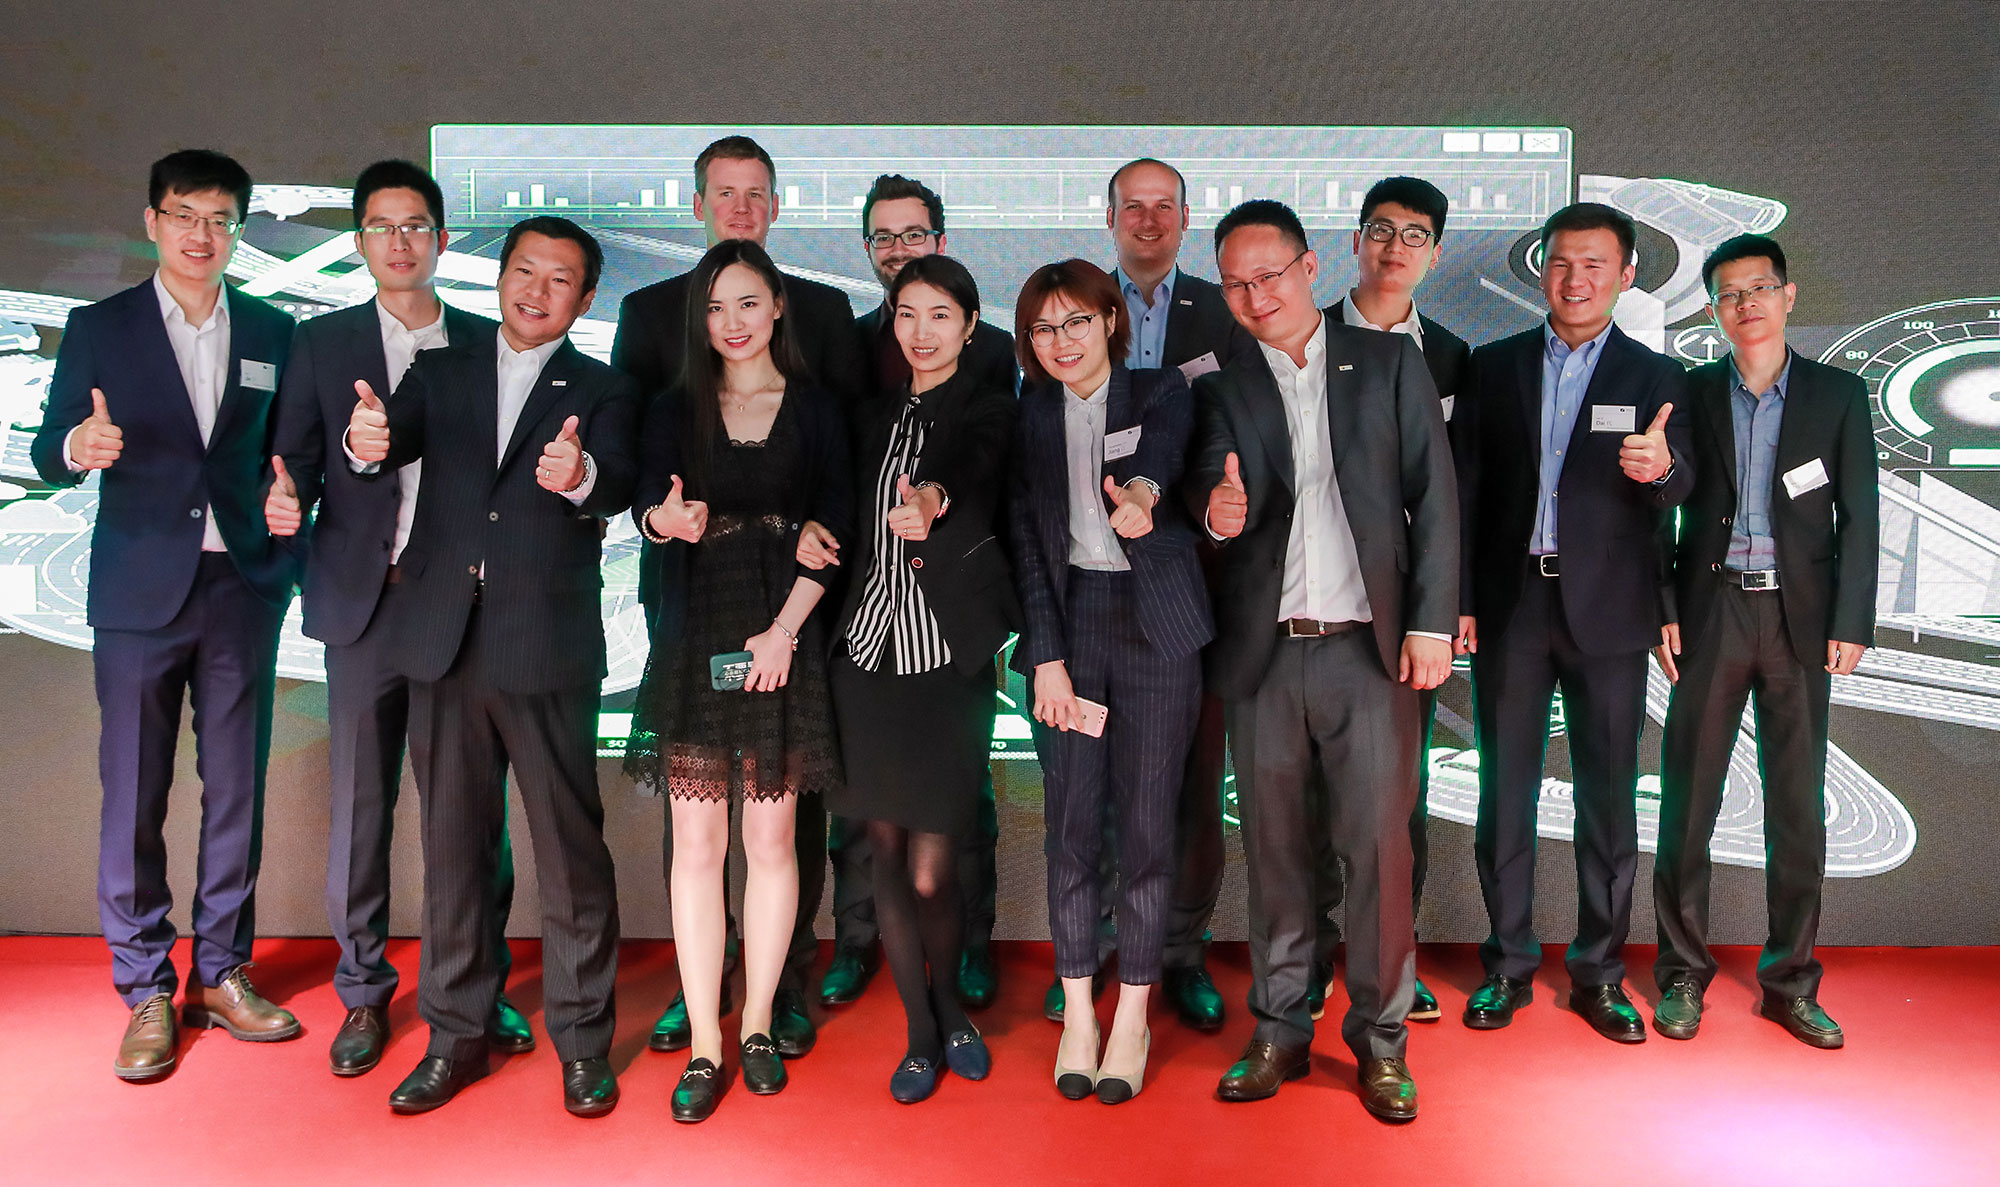 The IPG Automotive Team is looking forward to seeing you at next year's Open House Local Edition in Shanghai!